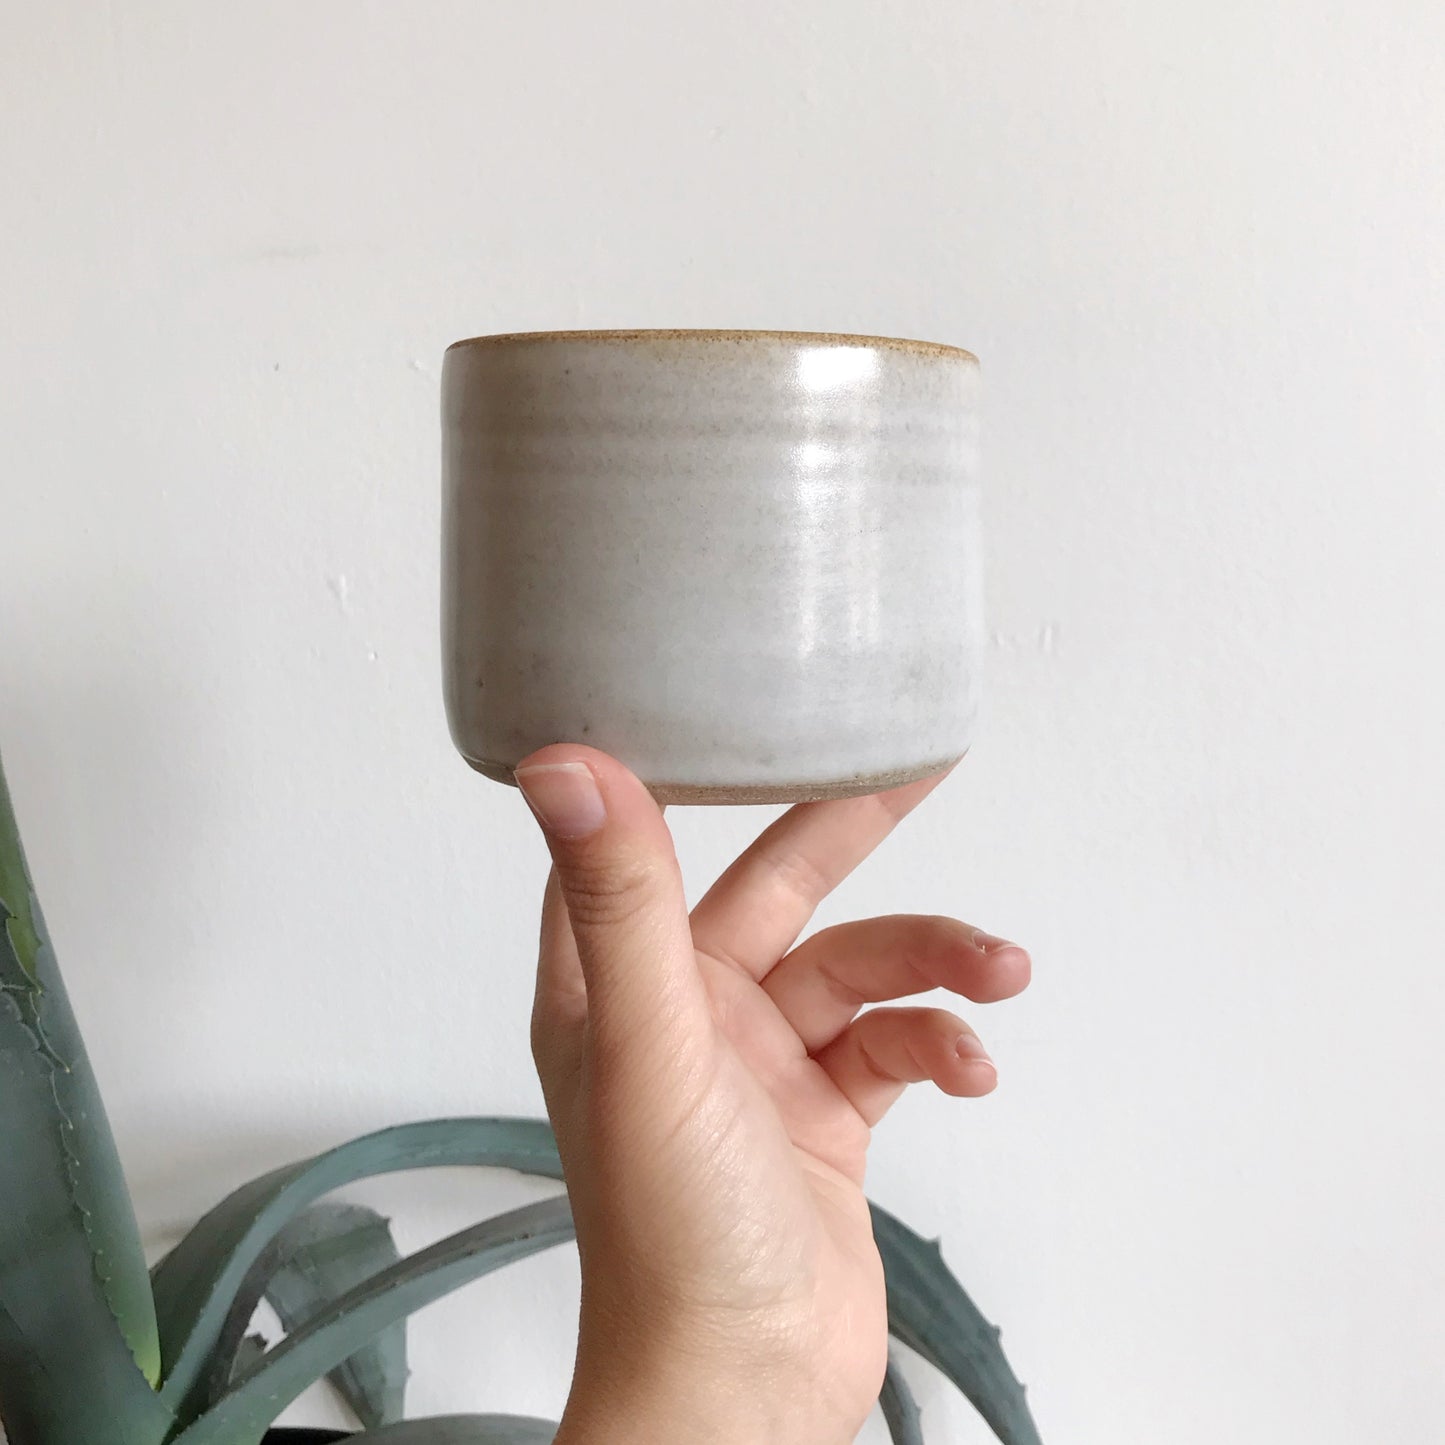 Handcrafted Pottery Cup / Container, Millner